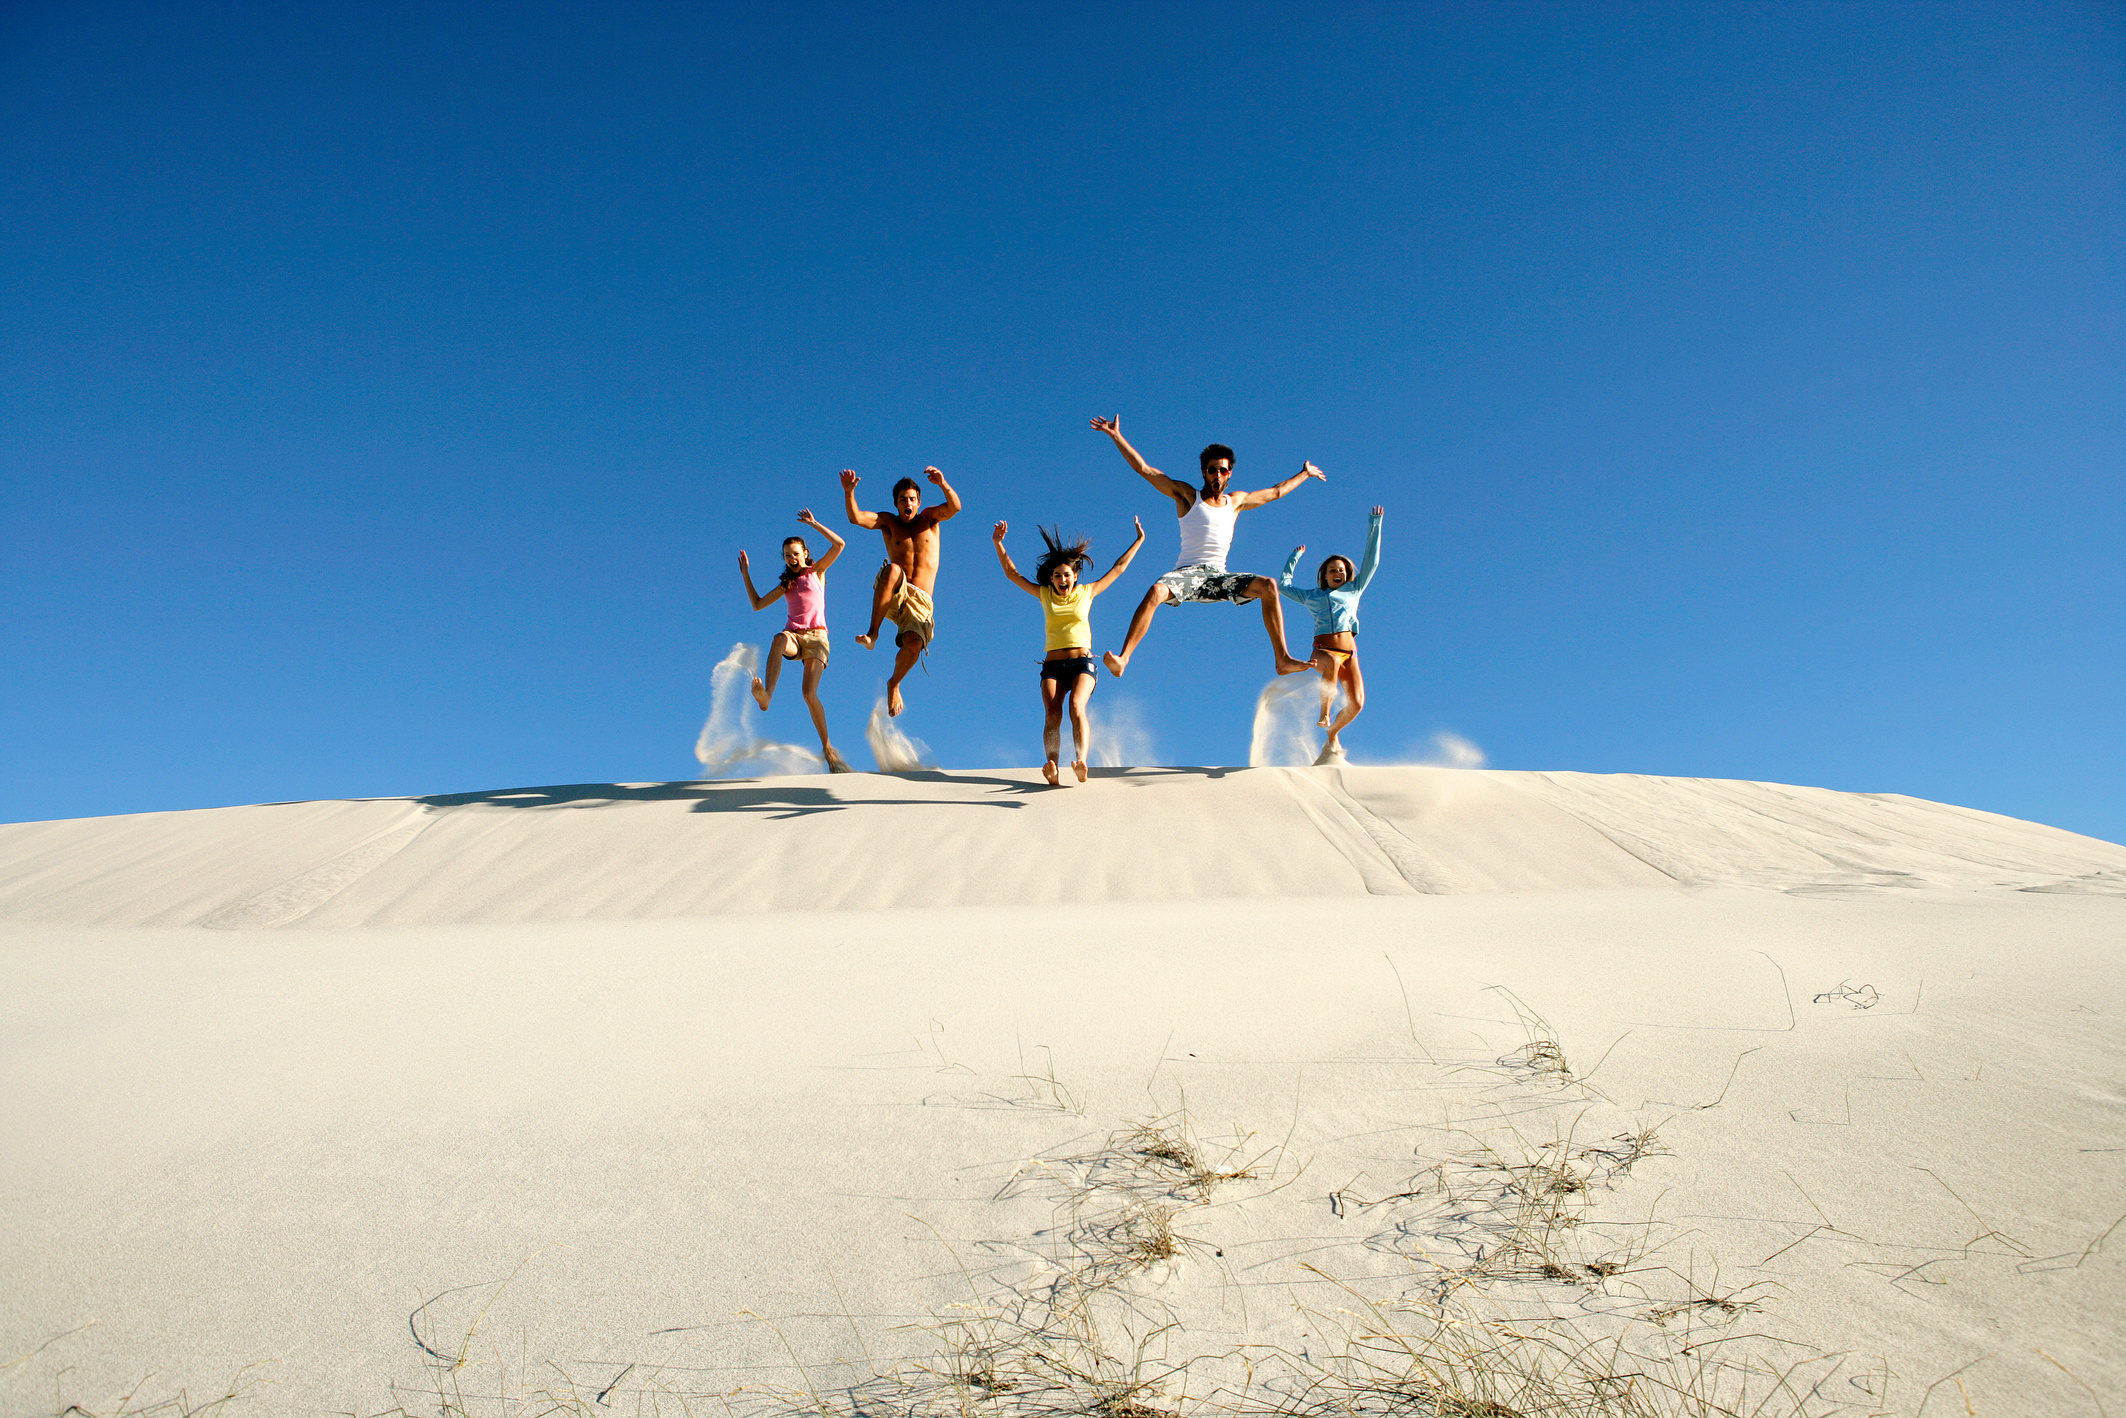 Group of people jumping in sand